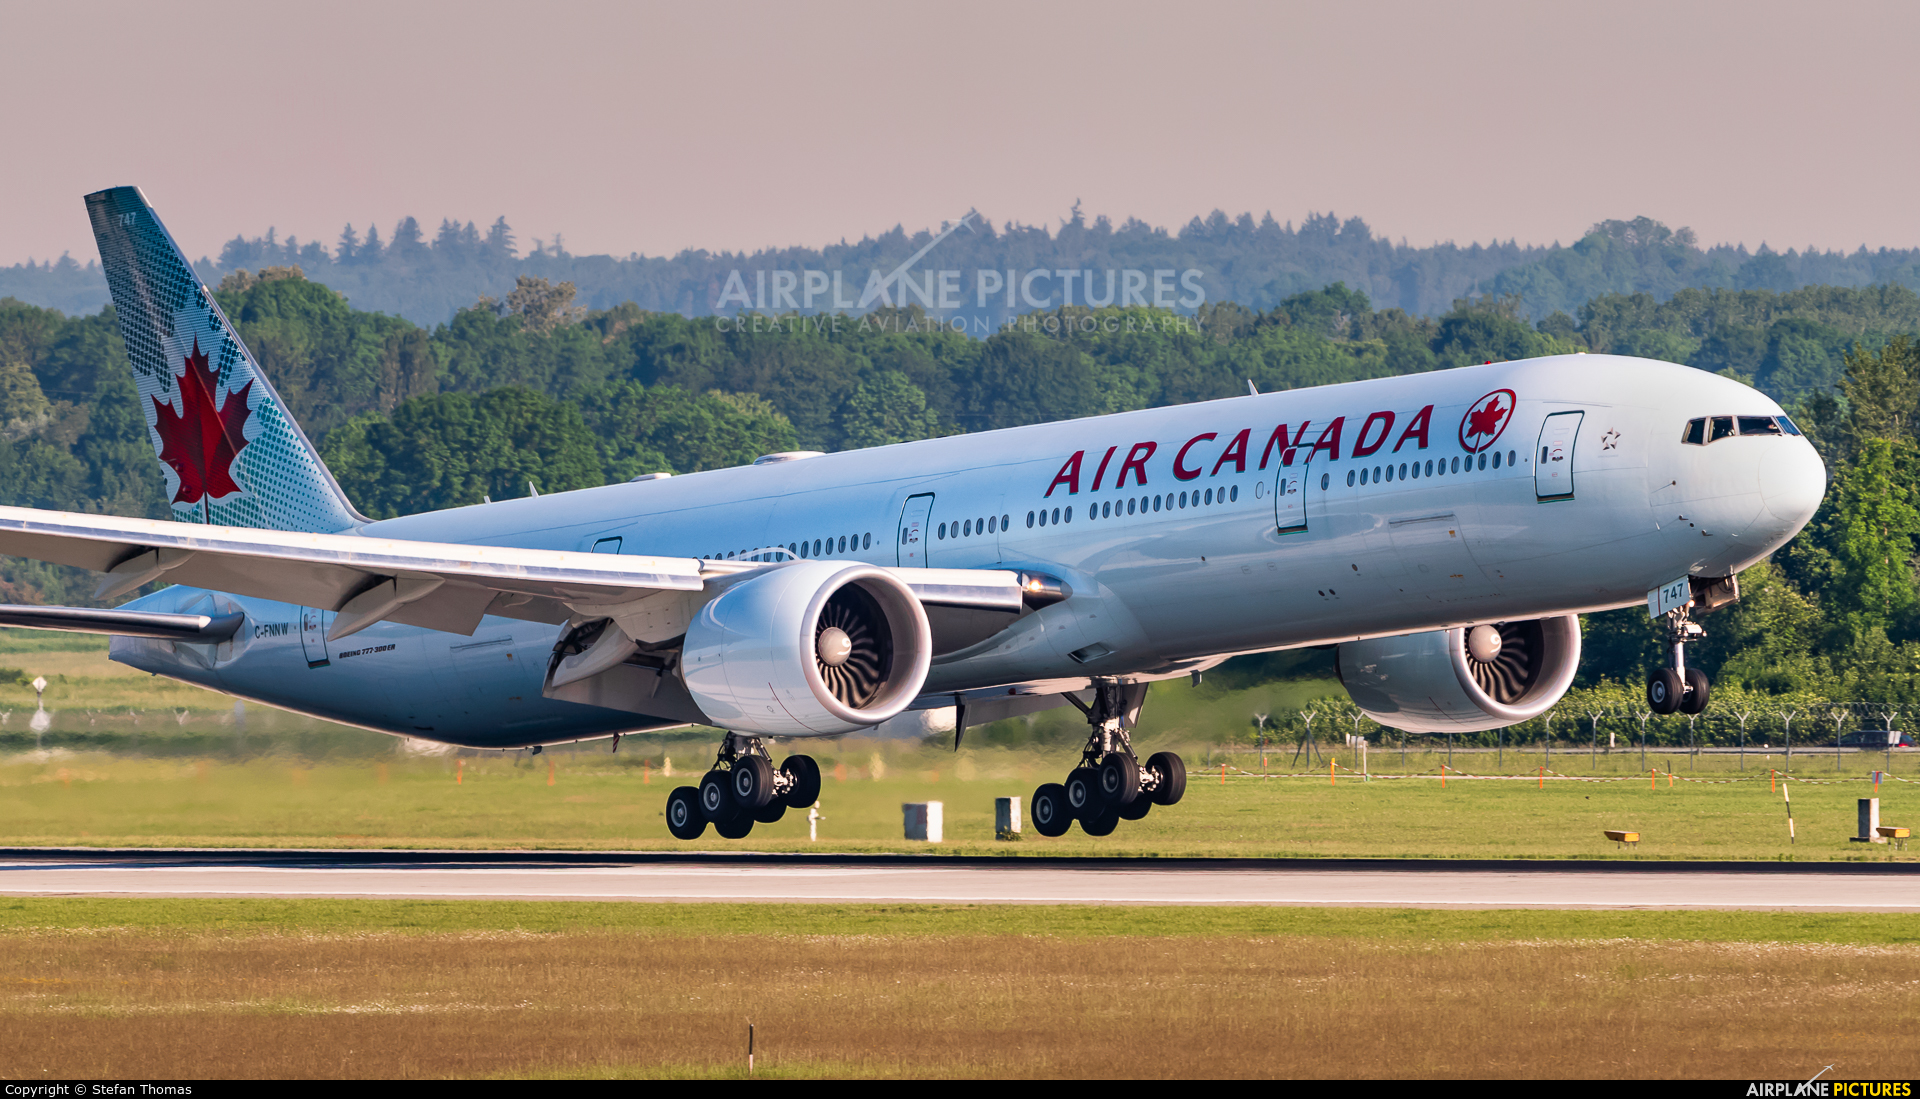 air canada travel to germany